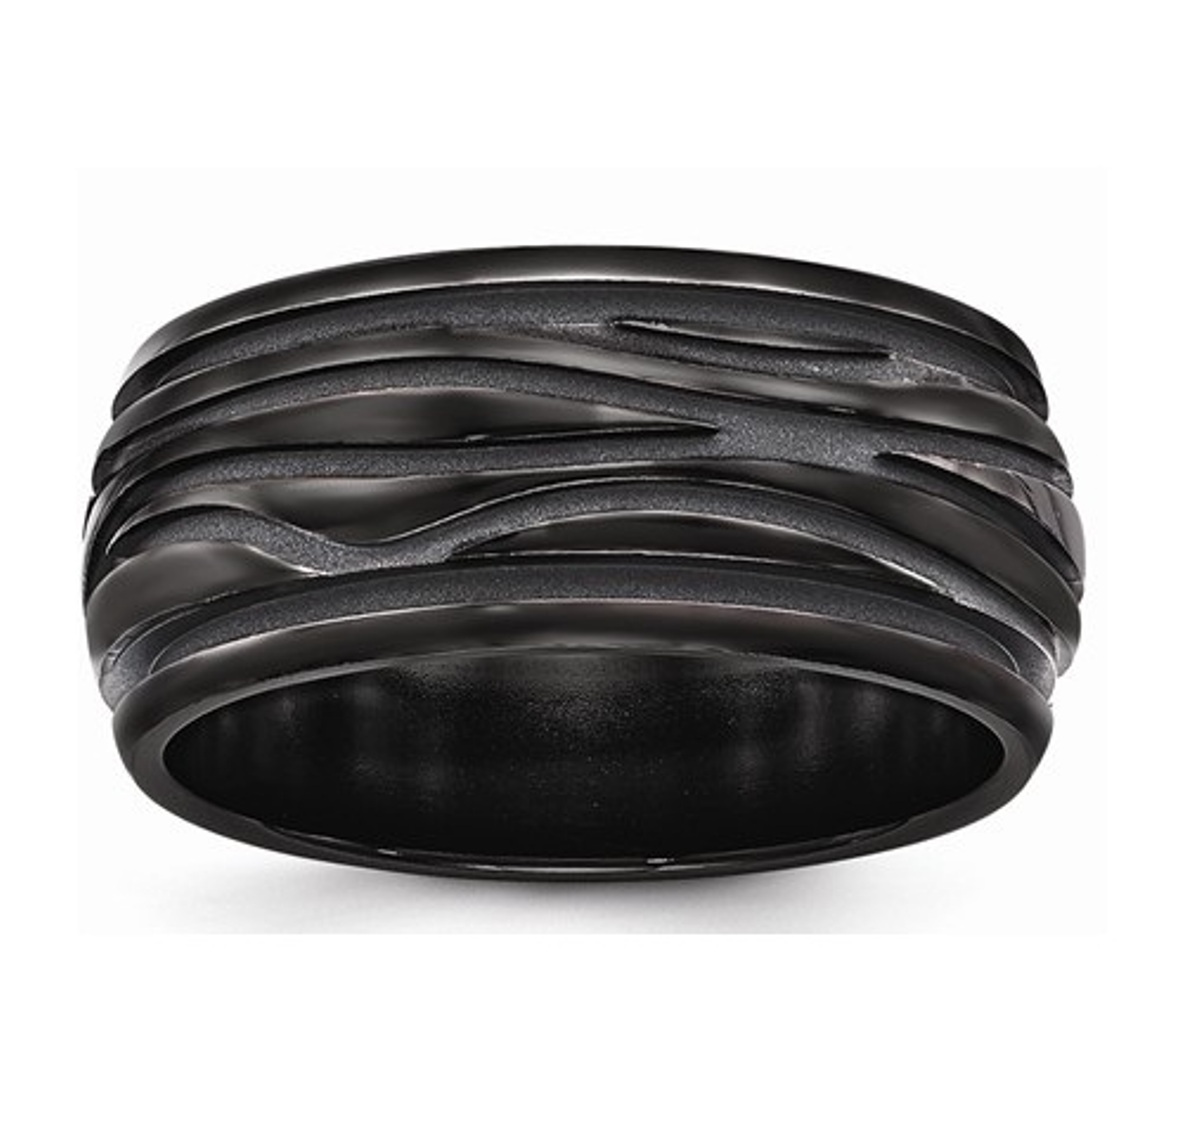  Black Ti Polished Grooved Wave Ring